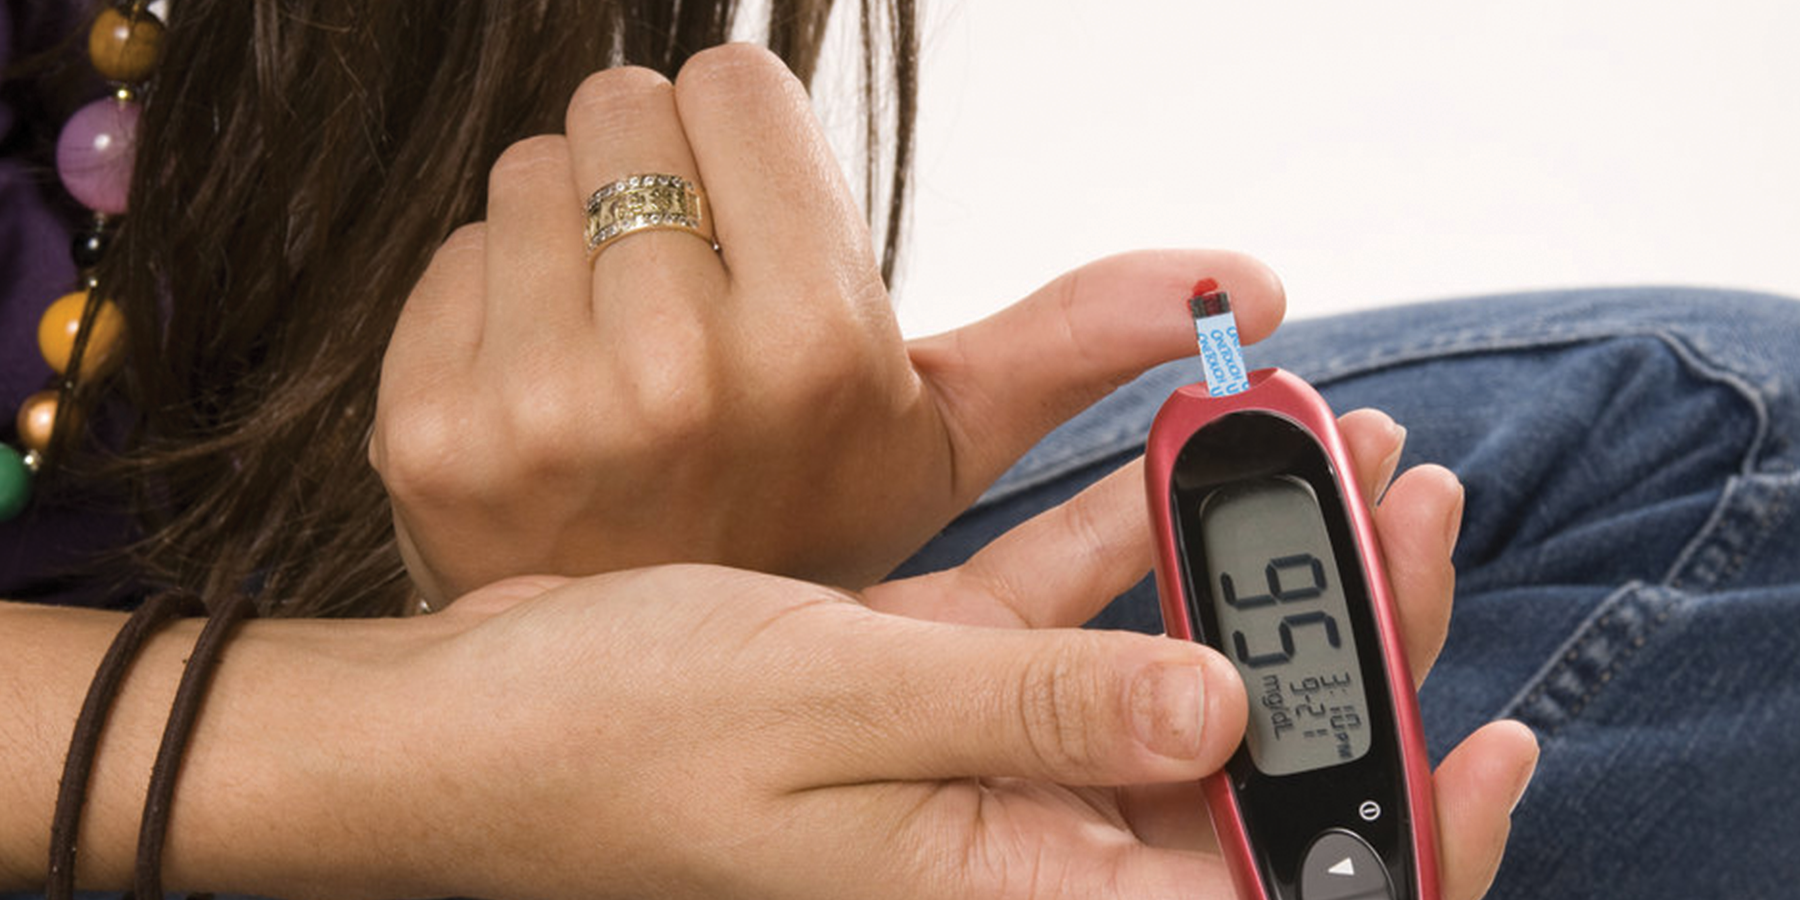 An Unhealthy Diet And Lack Of Exercise Can Lead To Type 2 Diabetes ...